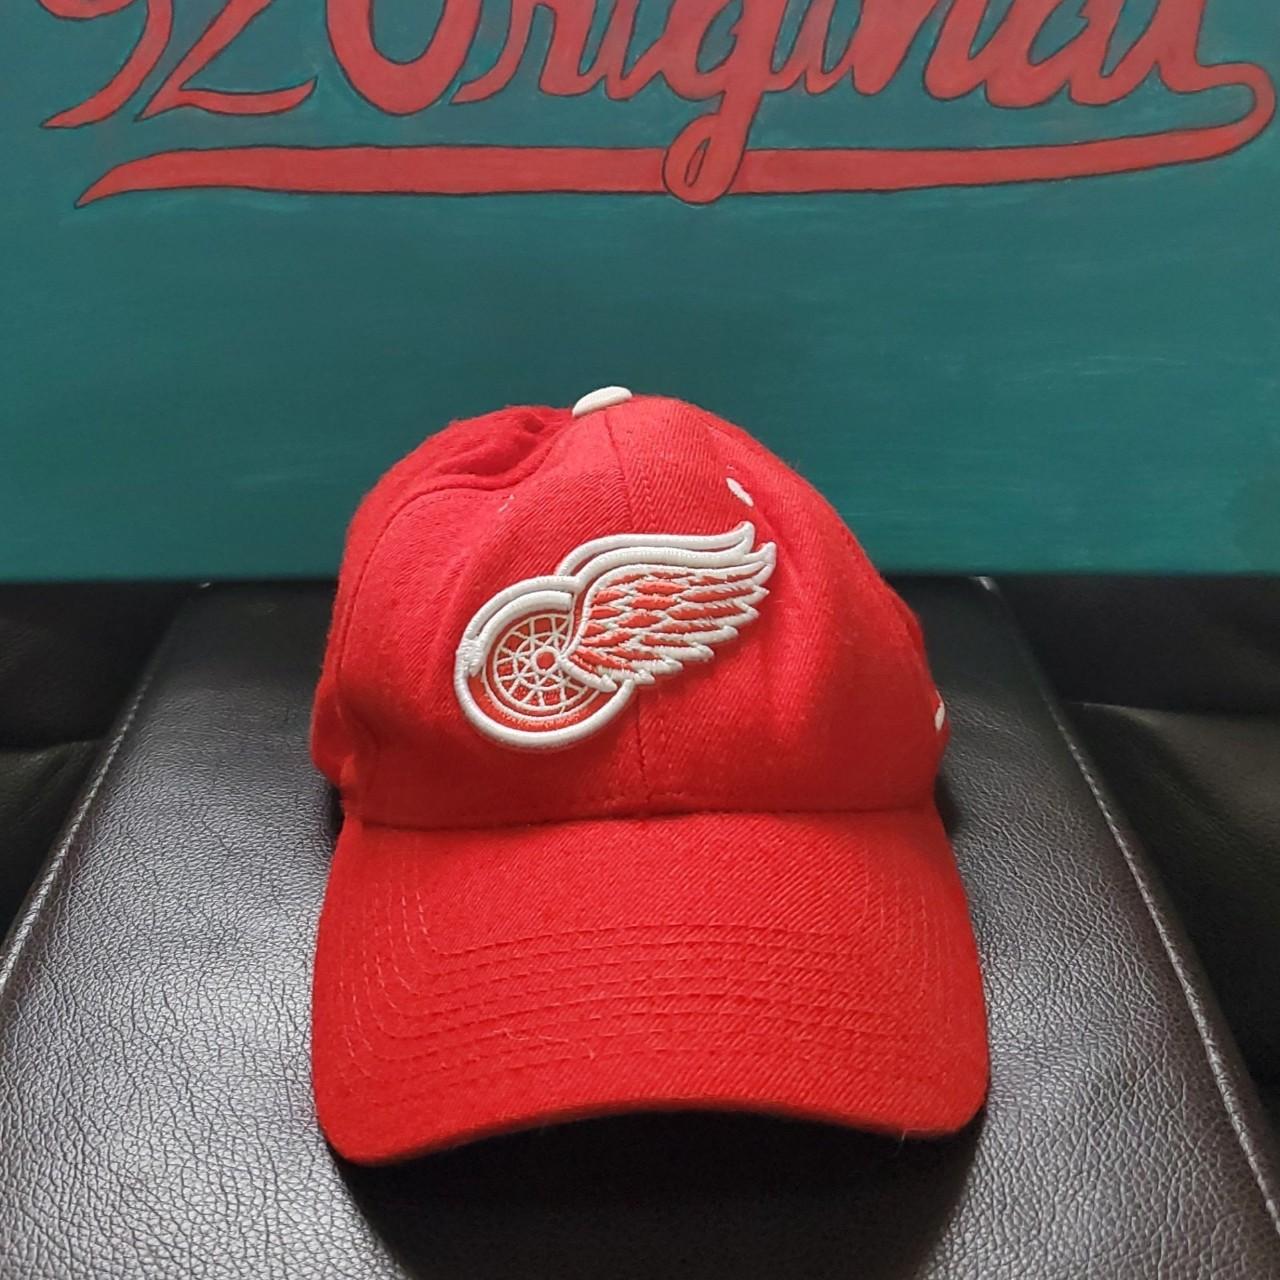 Product Image 1 - Red Nike Detroit Redwings velcro🏒🧢

Size: